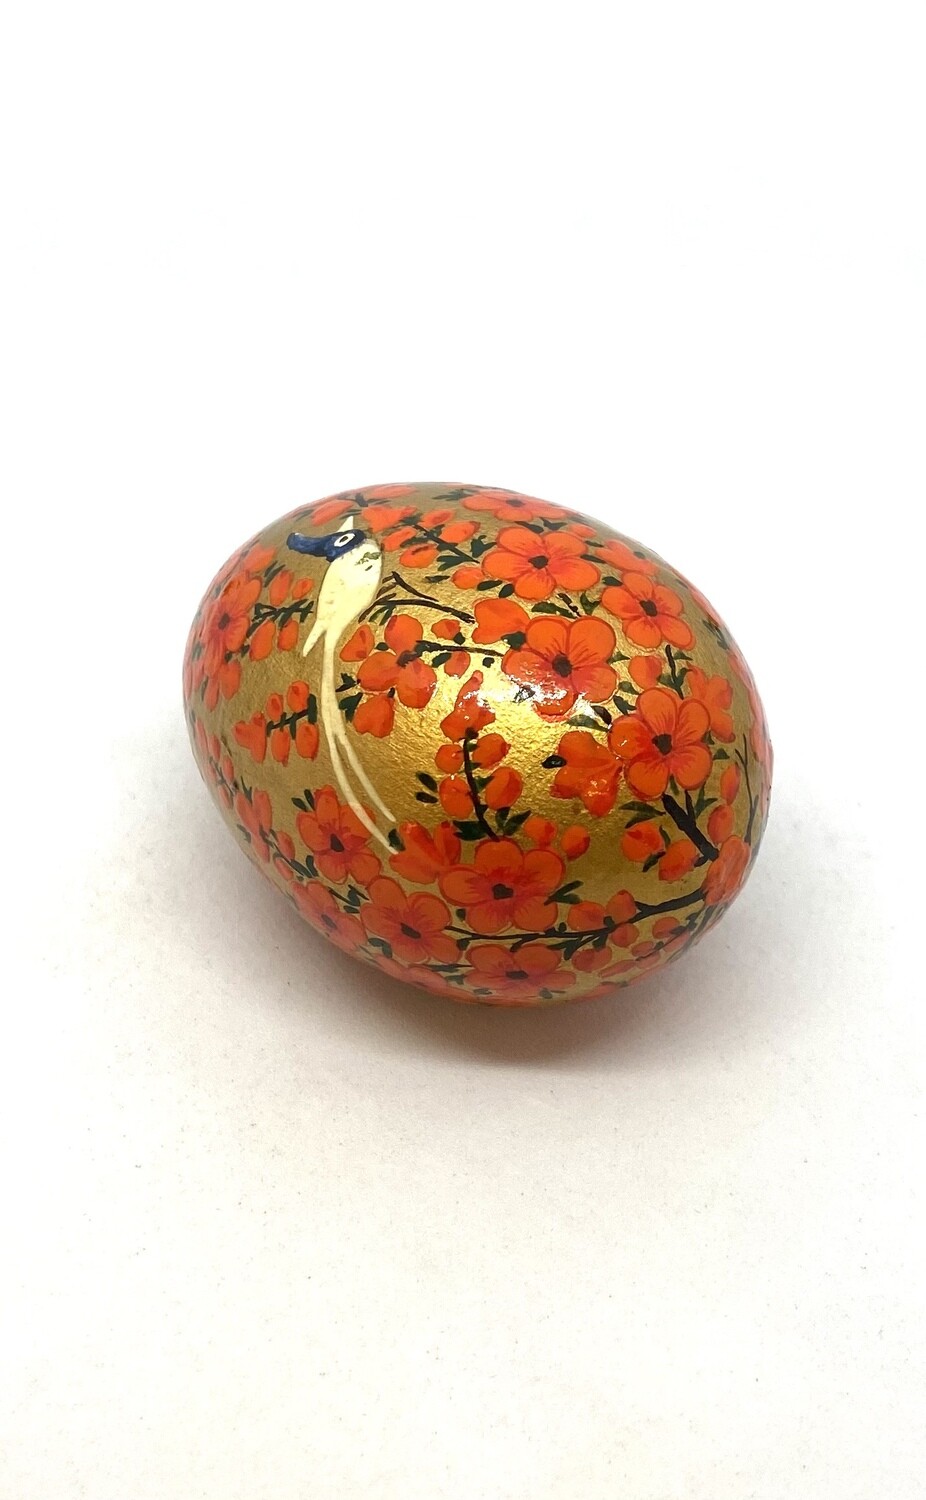 Hand-Painted Lacquered Wood Egg with Orange Flowers and Blue Bird